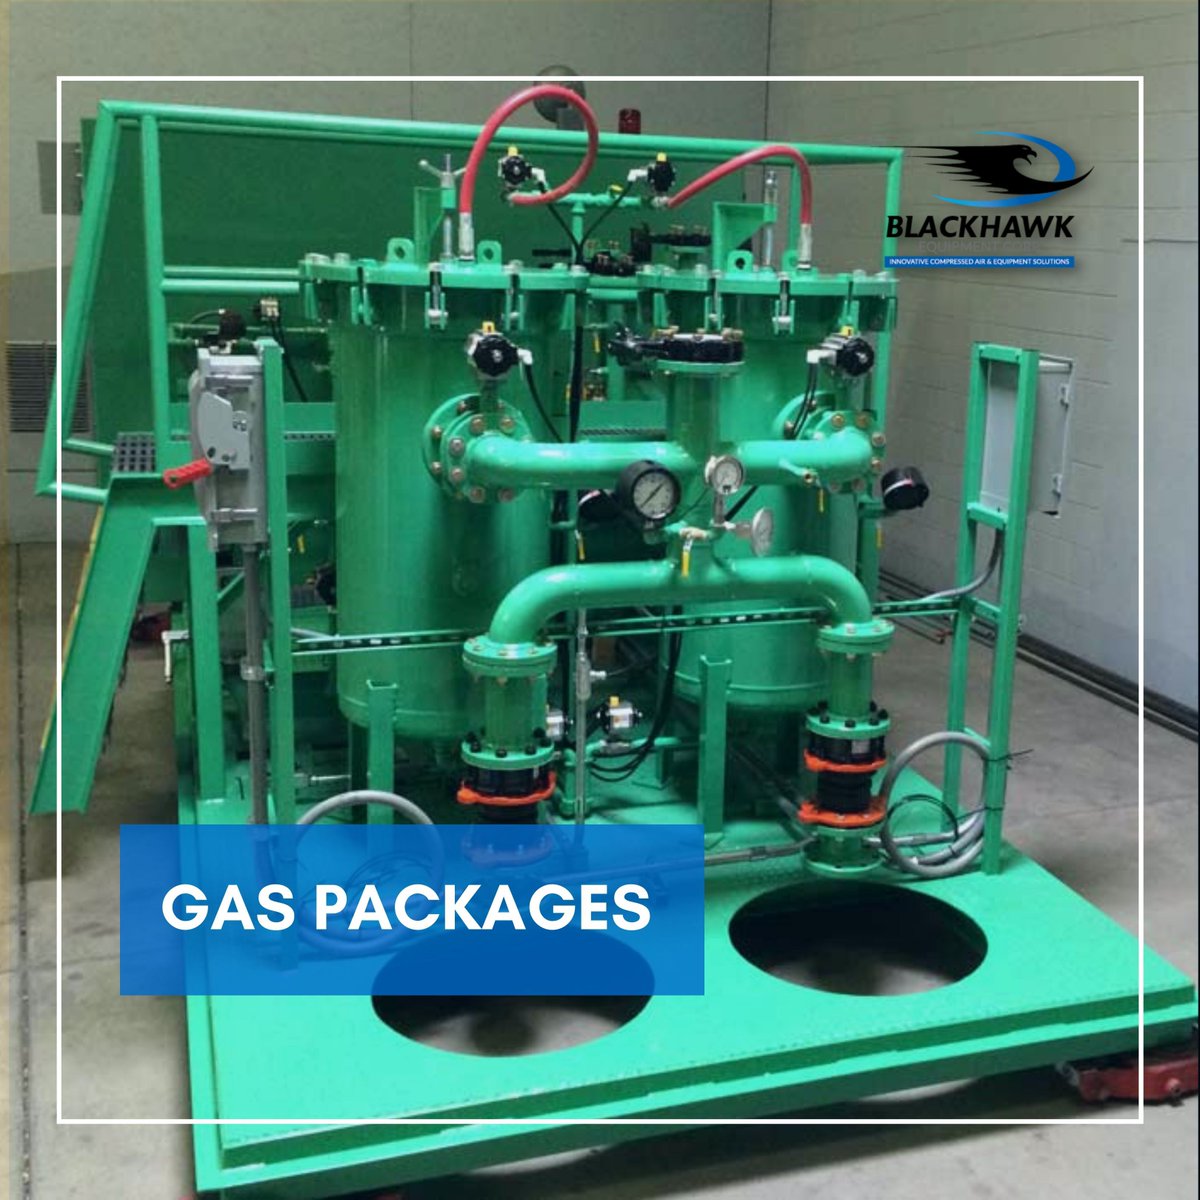 Blackhawk Equipment can engineer and fabricate custom gas packages for the optimum solution to your operations.  #BlackhawkEquipment #GasPackages https://t.co/wHu6vFGpwL